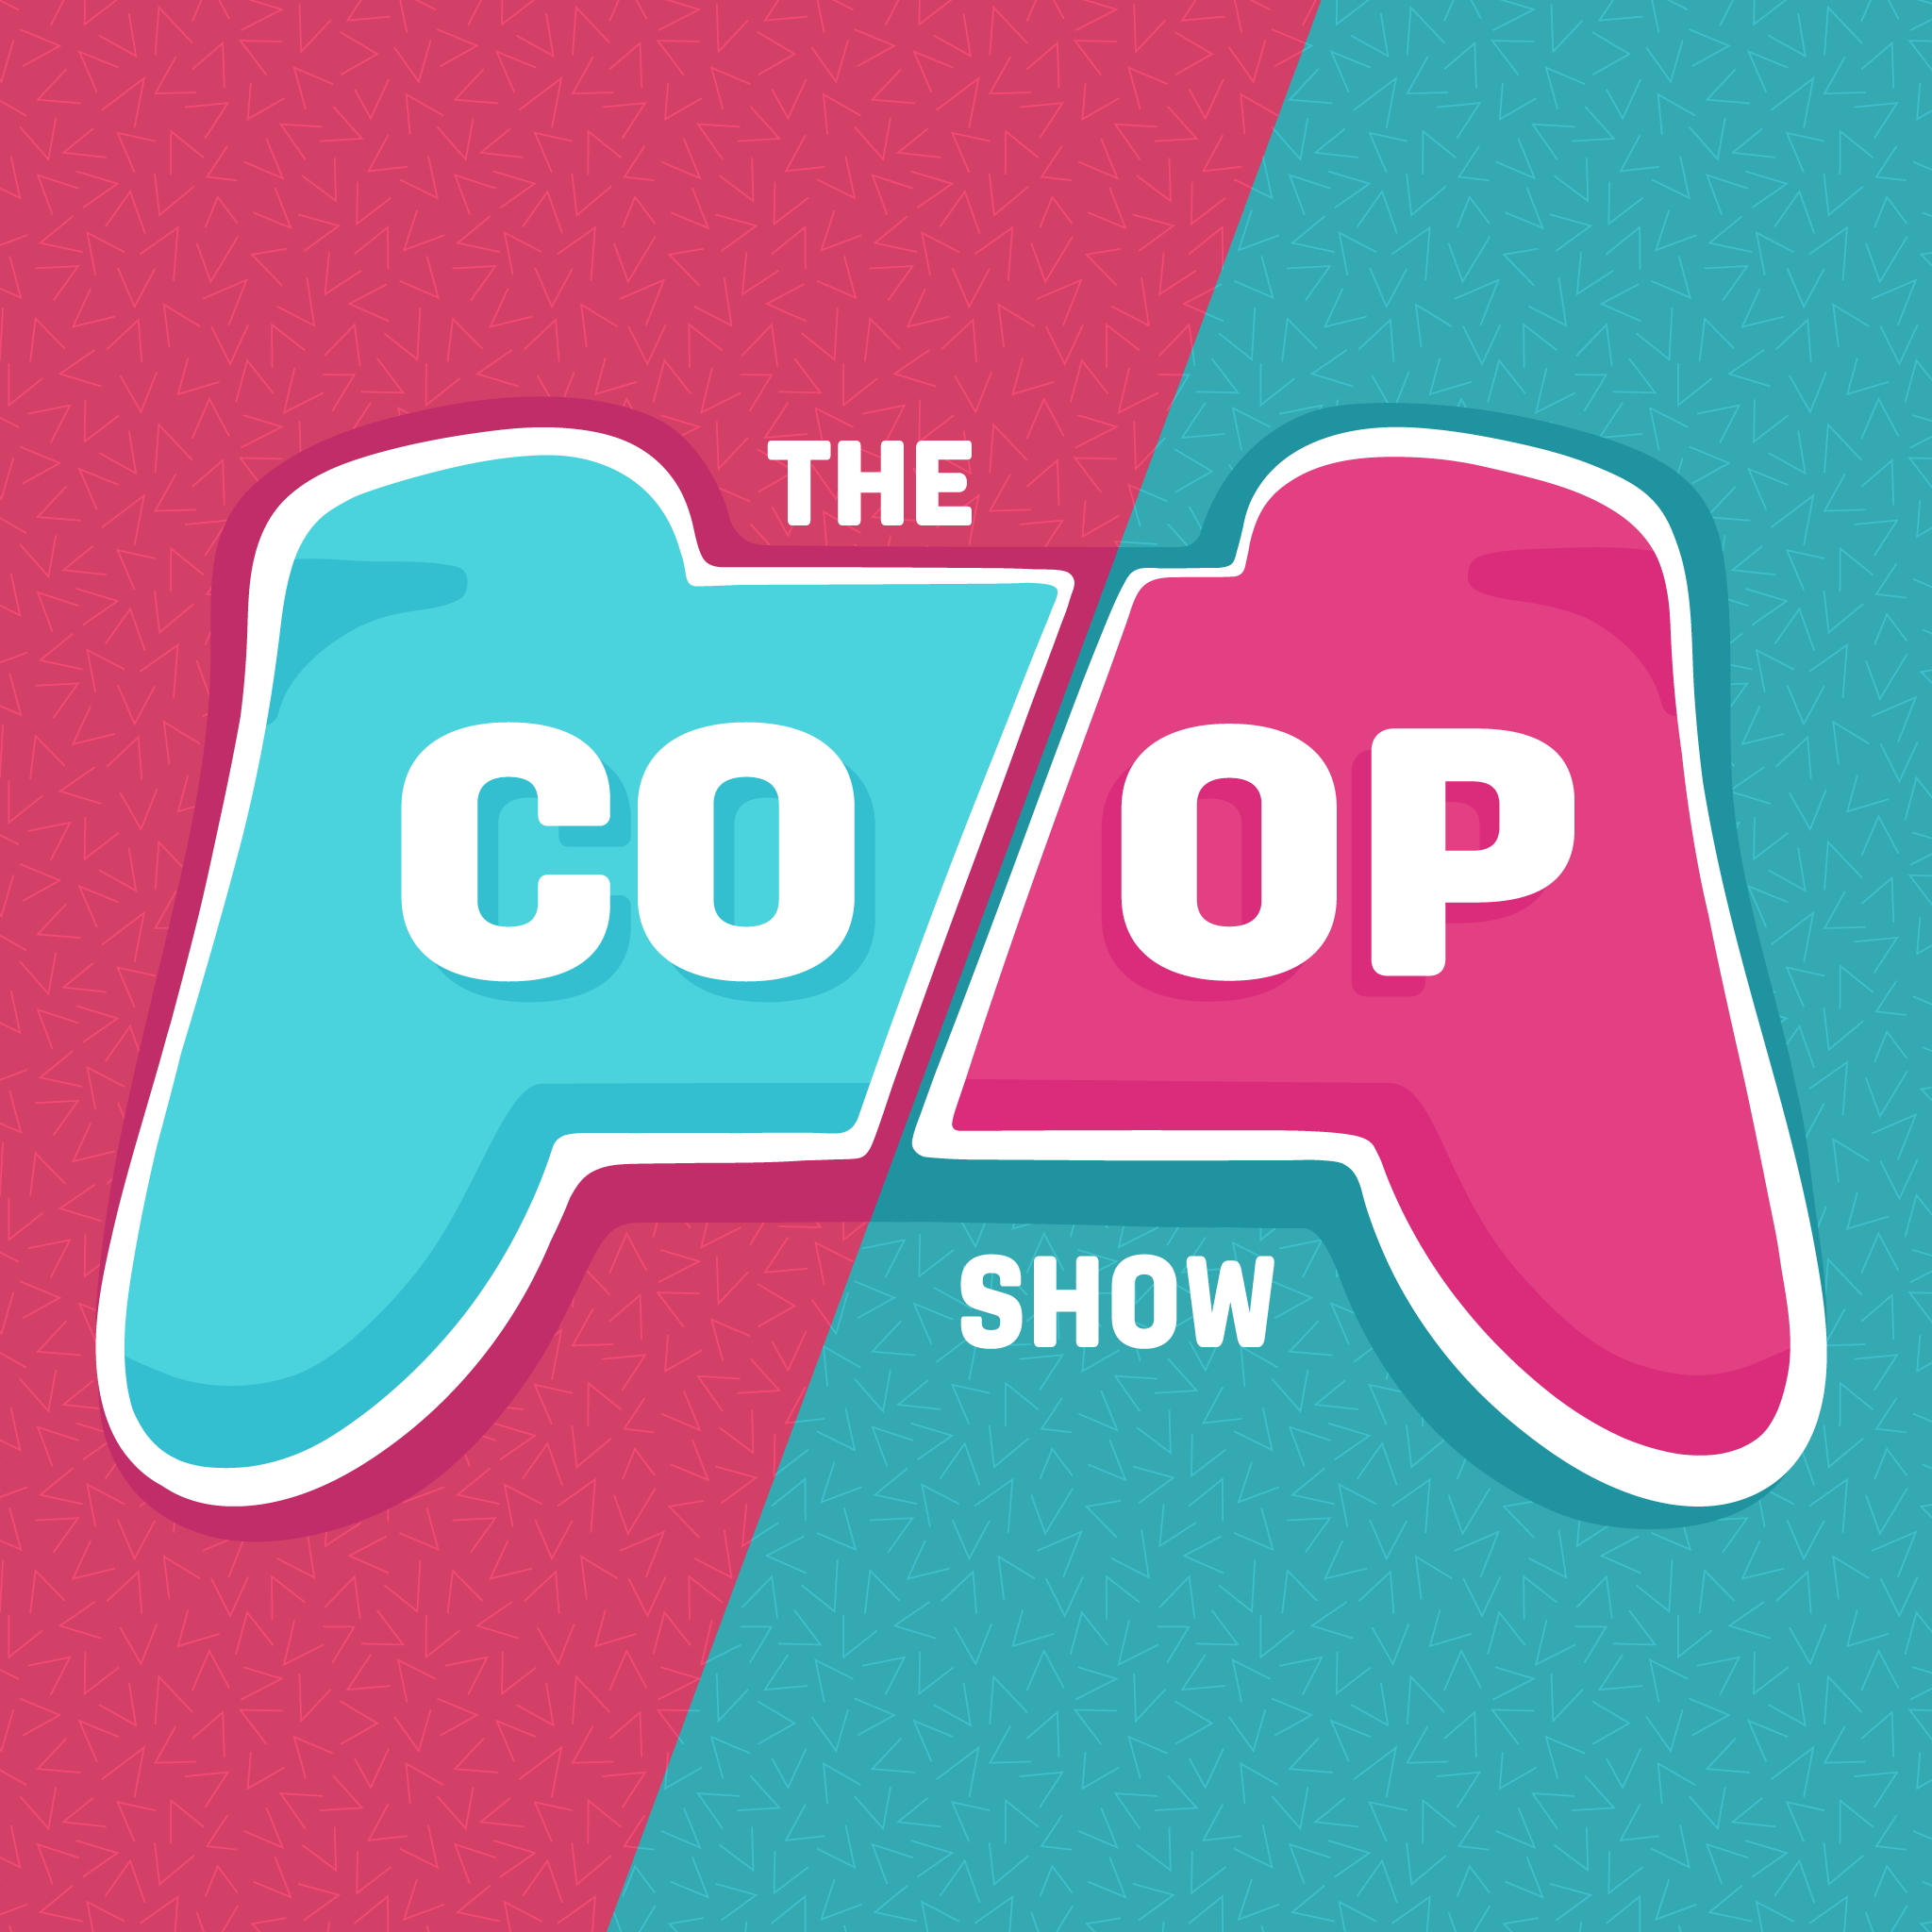 The coop show